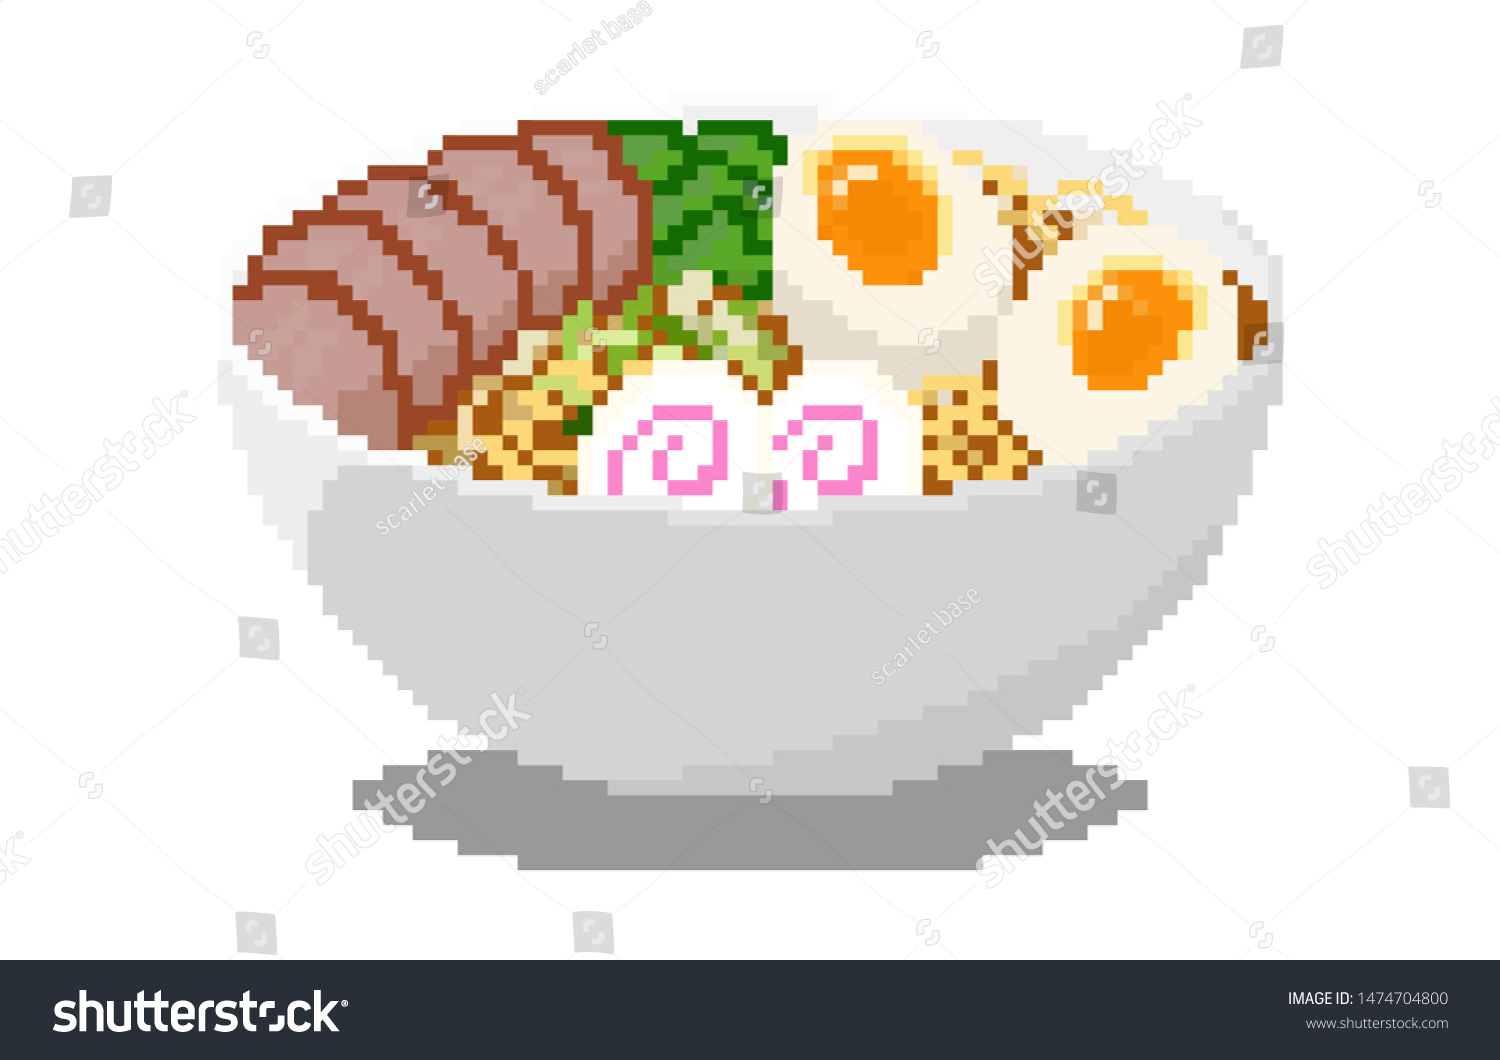 SVG of Pixel art japanese ramen soup with meat slice, egg, vegetable and naruto on white background vector illustration
 svg